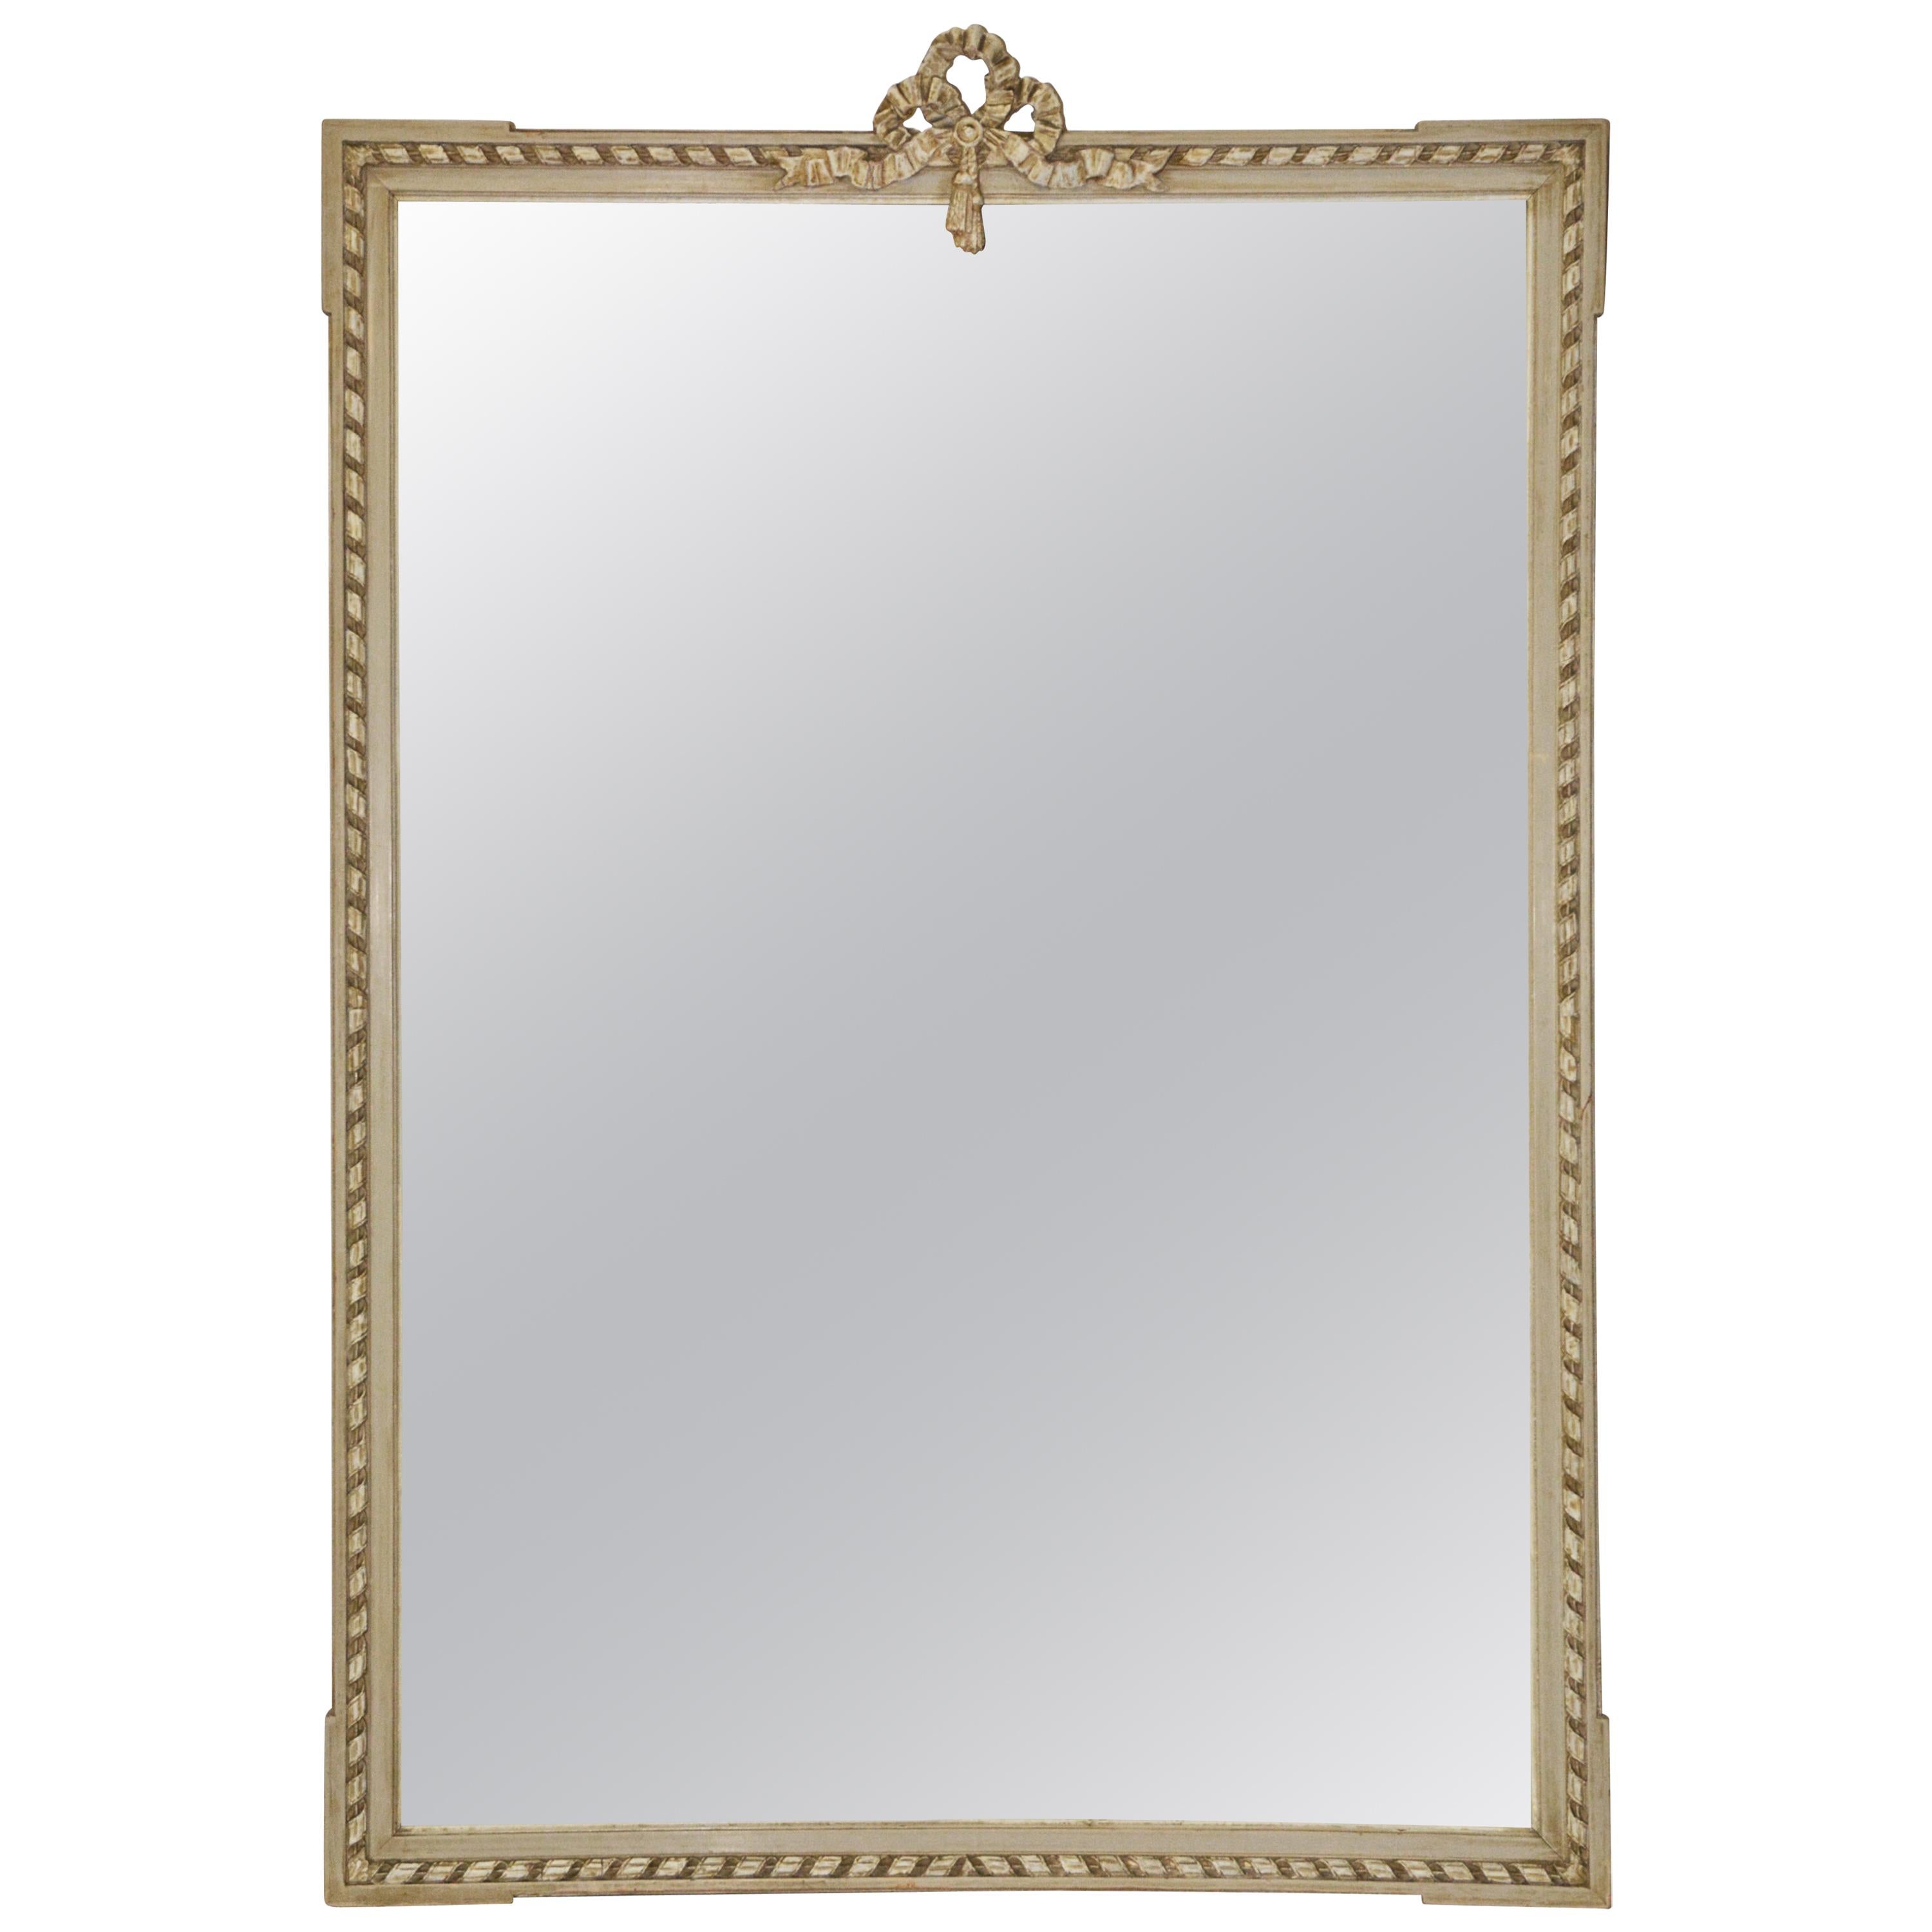 Neoclassical-Style Mirror